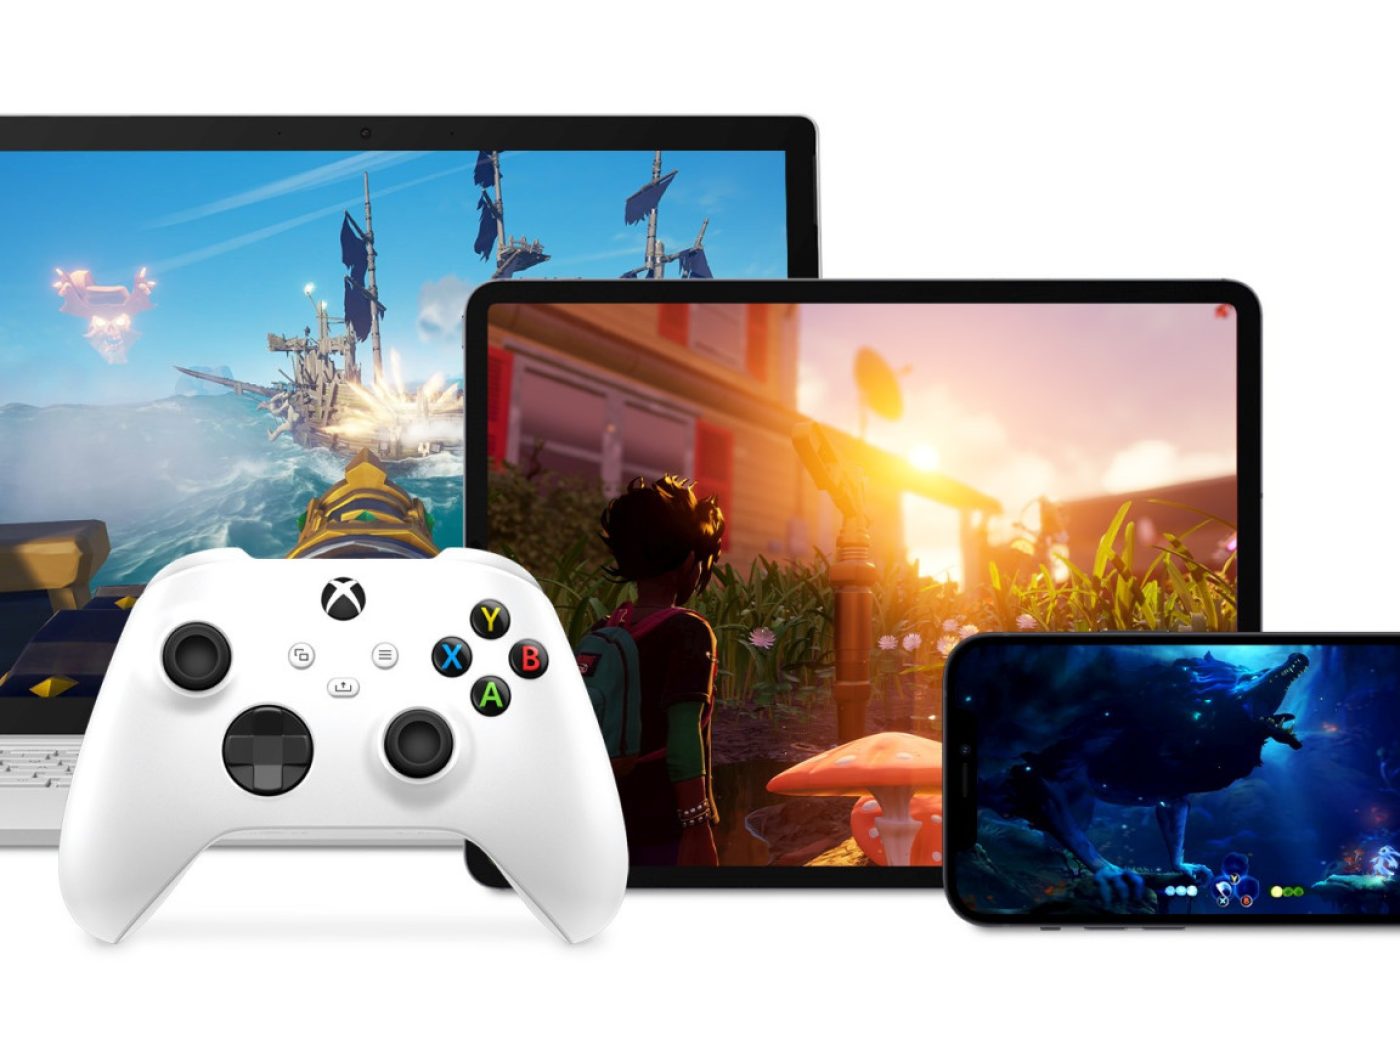 Microsoft Signs 10-Year Partnership to Bring Xbox Games on PC to